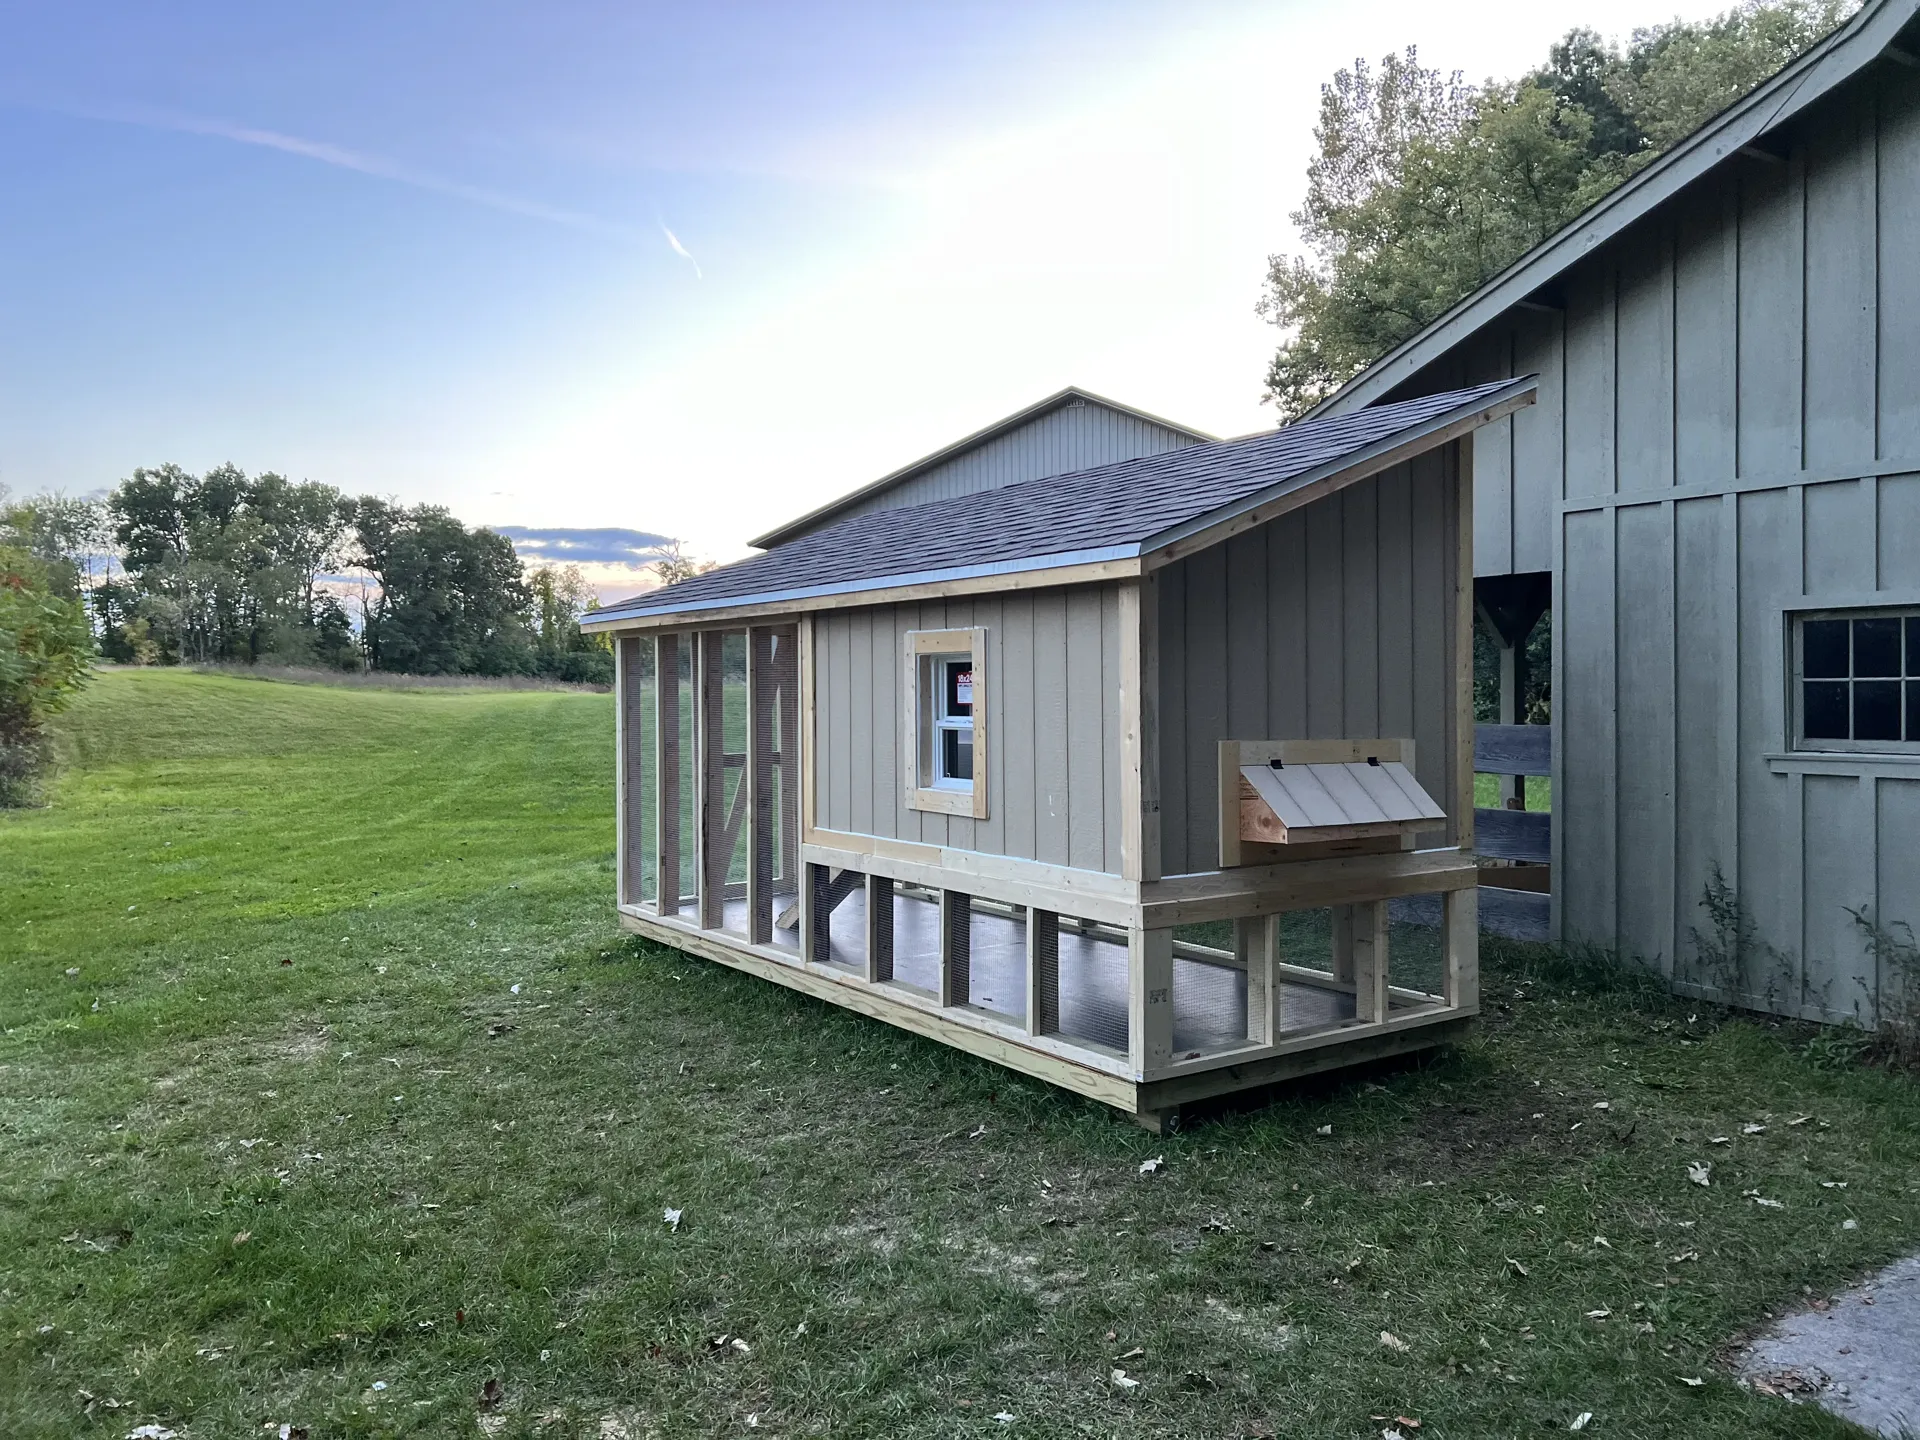 View of completed coop